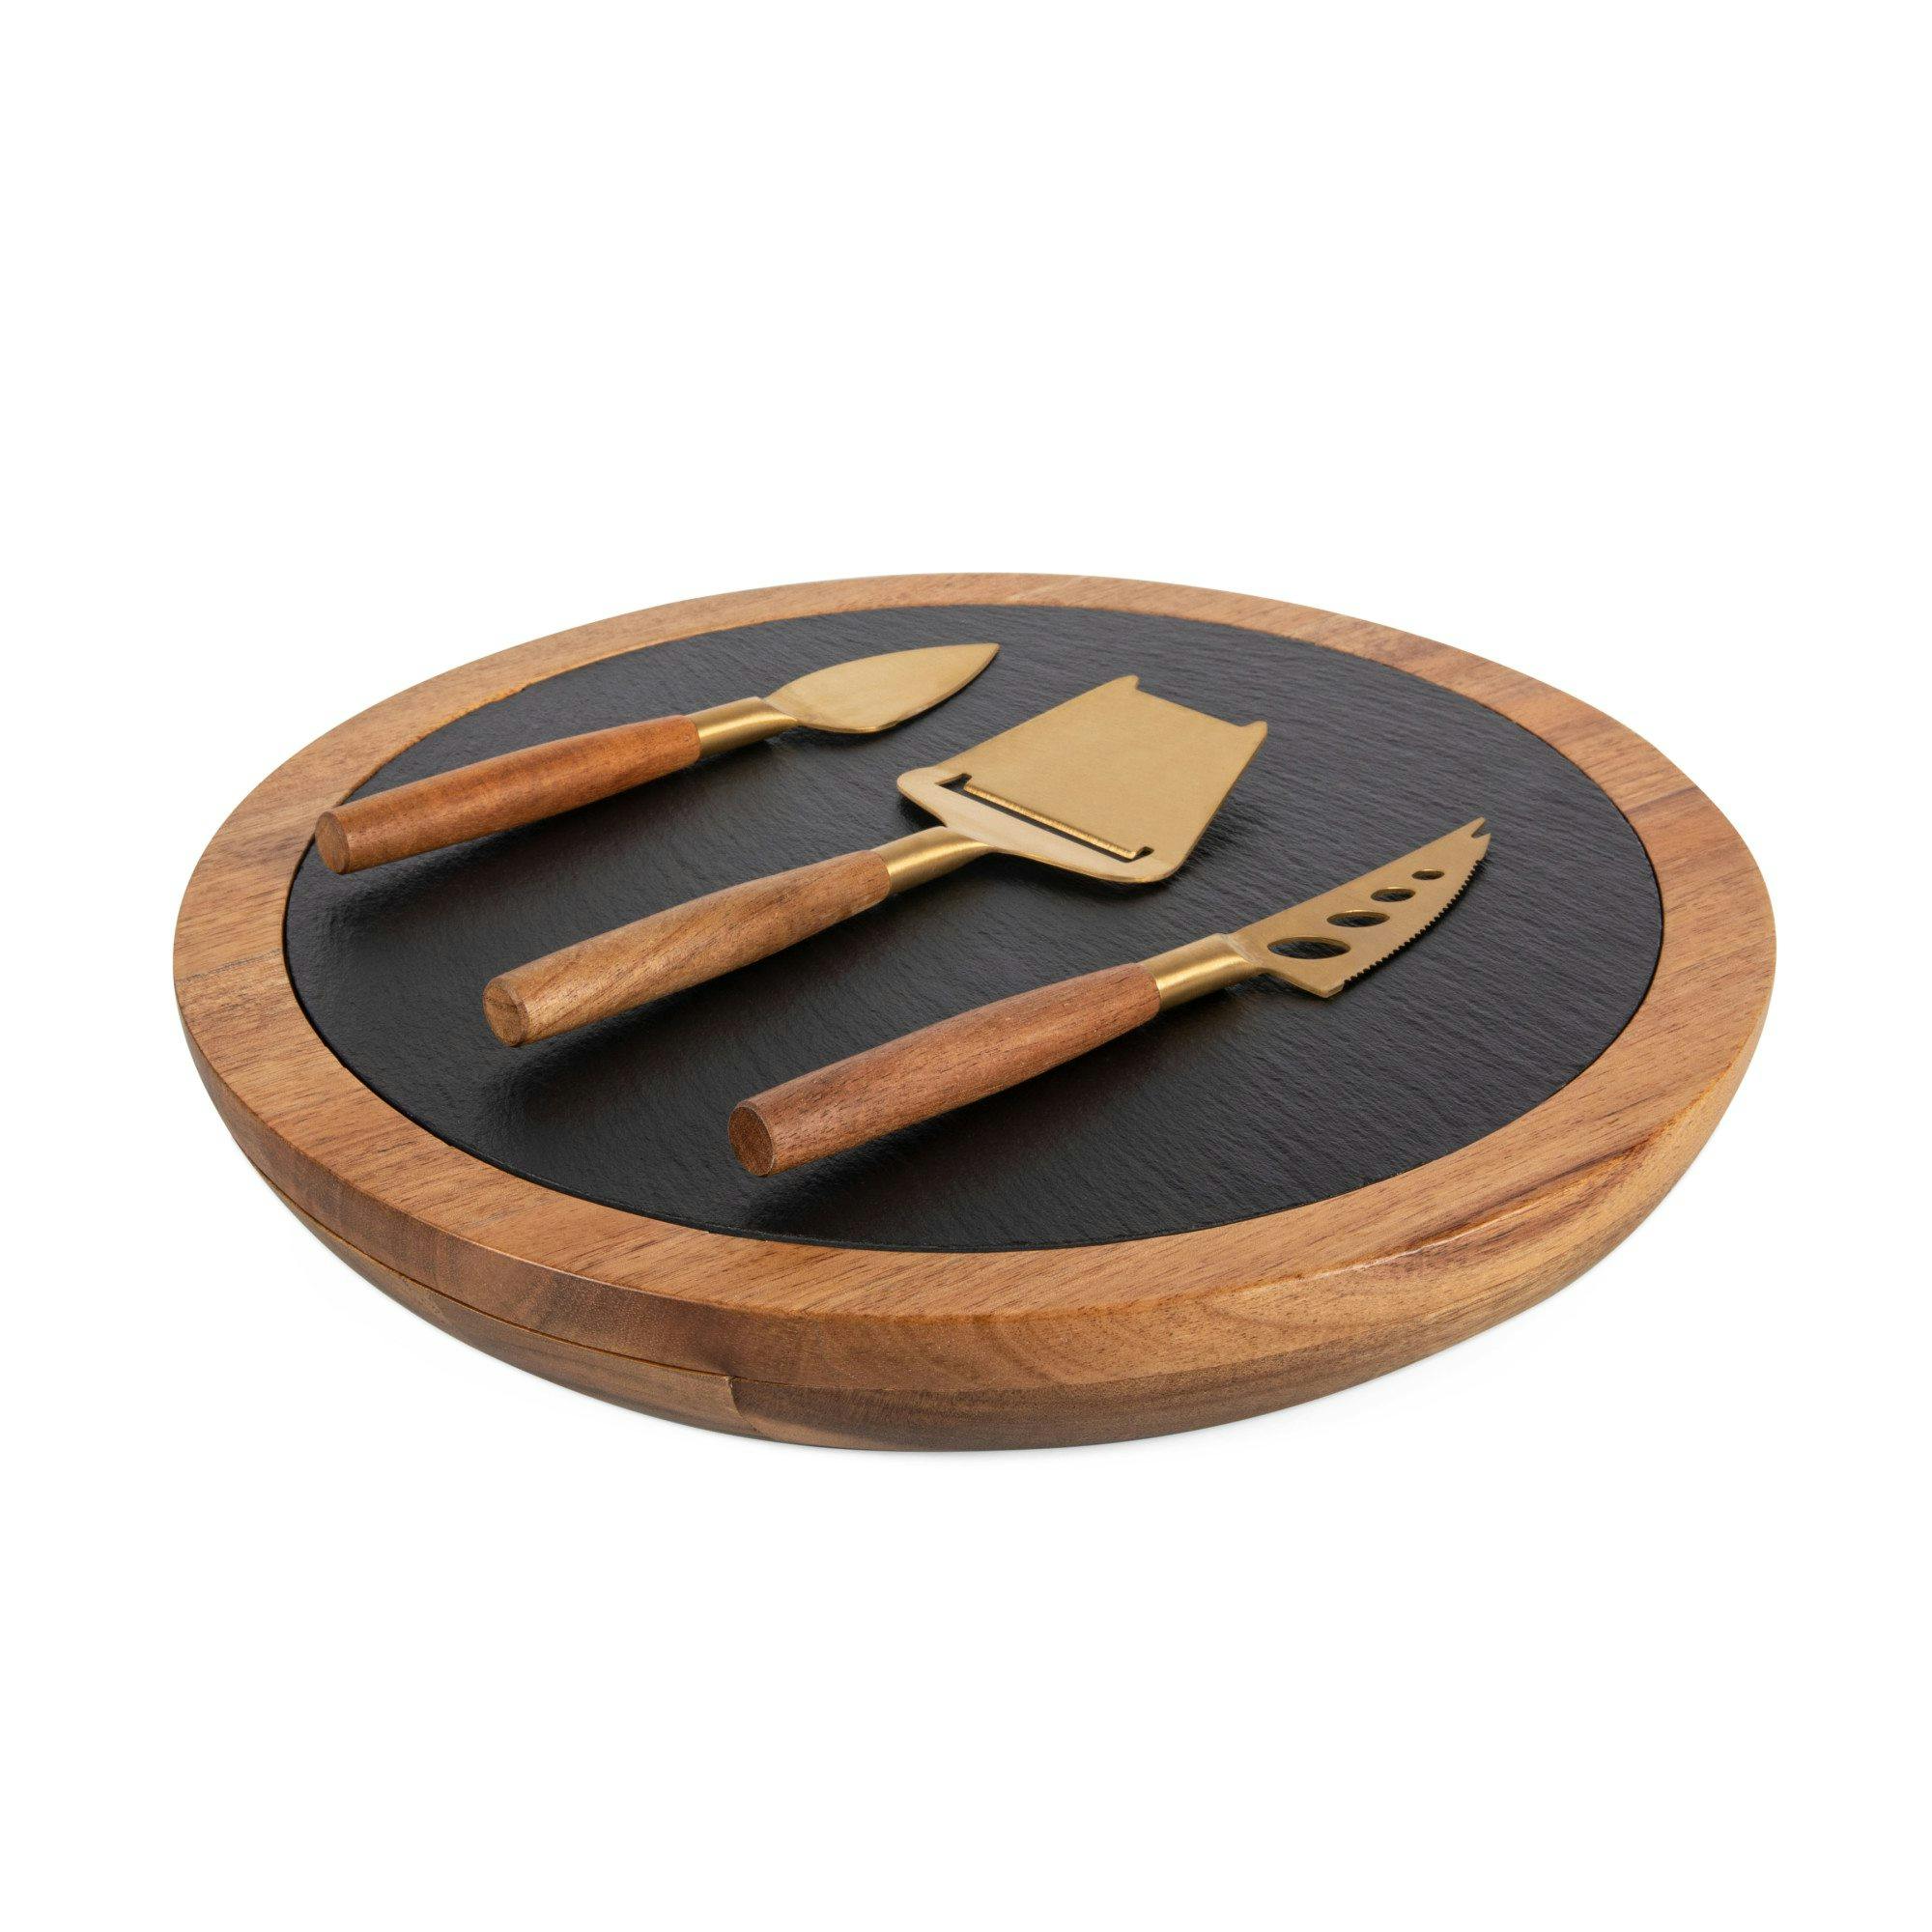 The Insignia  Acacia and Slate Serving Board with Cheese Tools